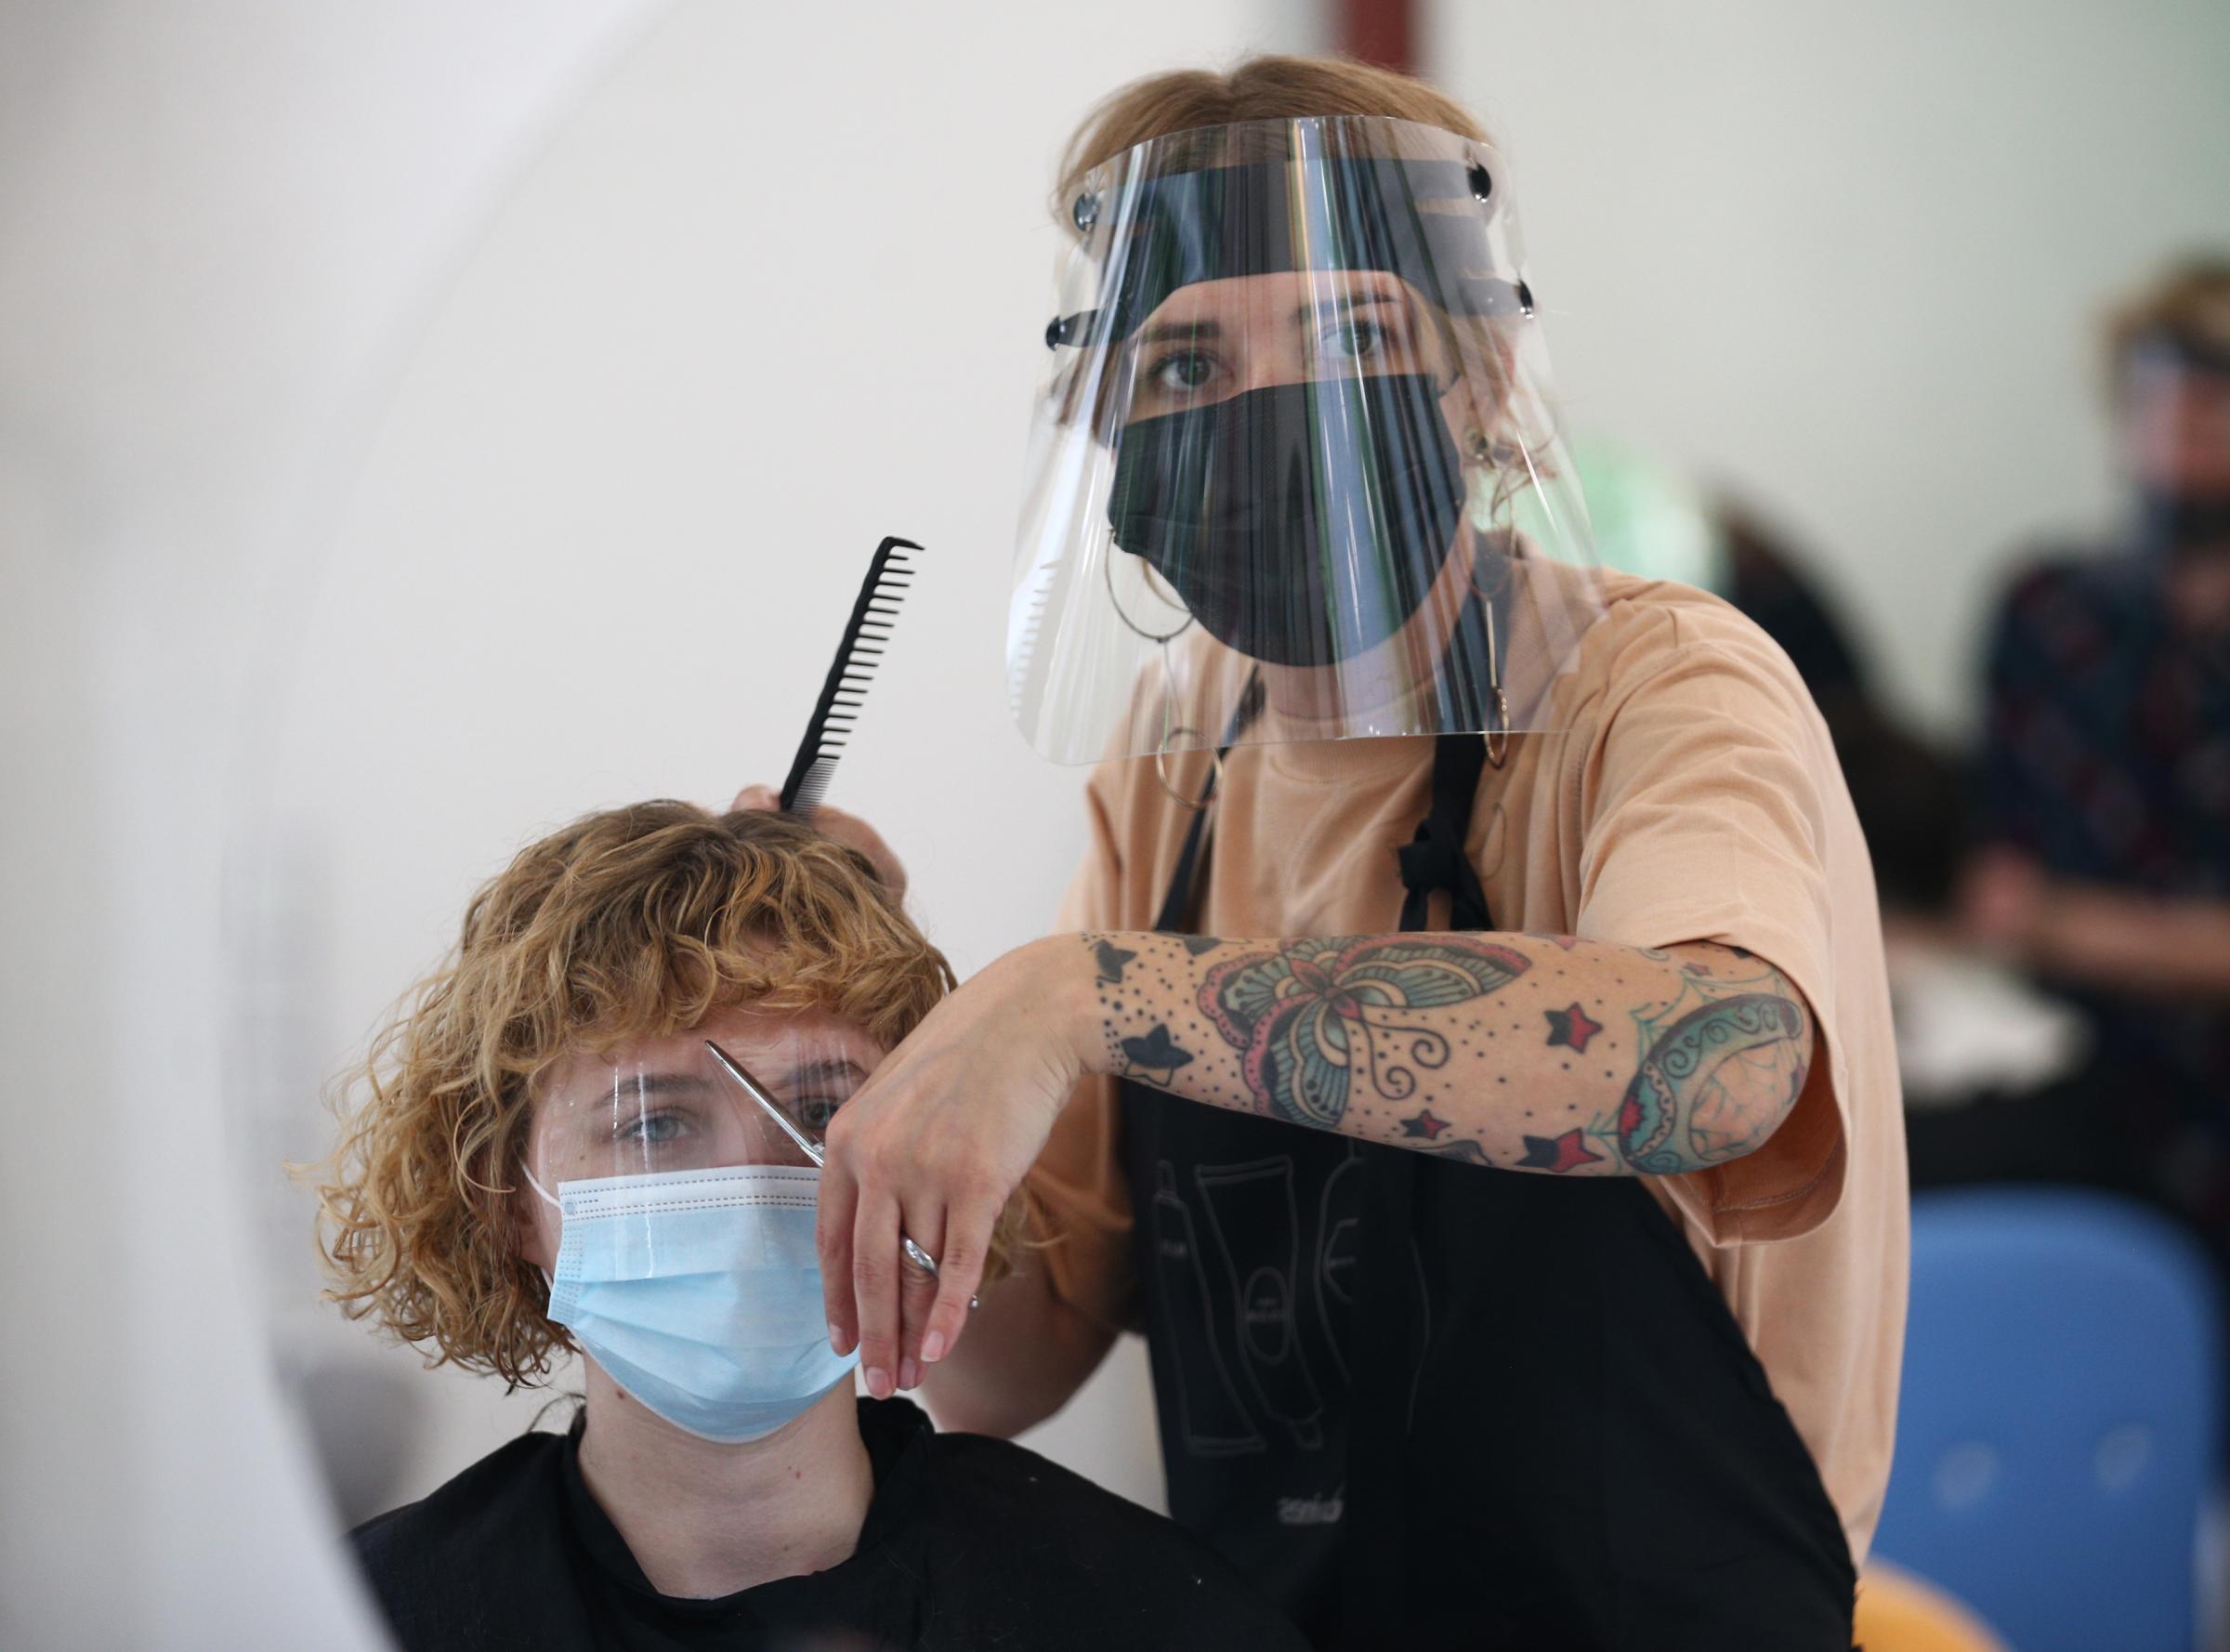 The Best Ways To Win Salon Clients During The Pandemic